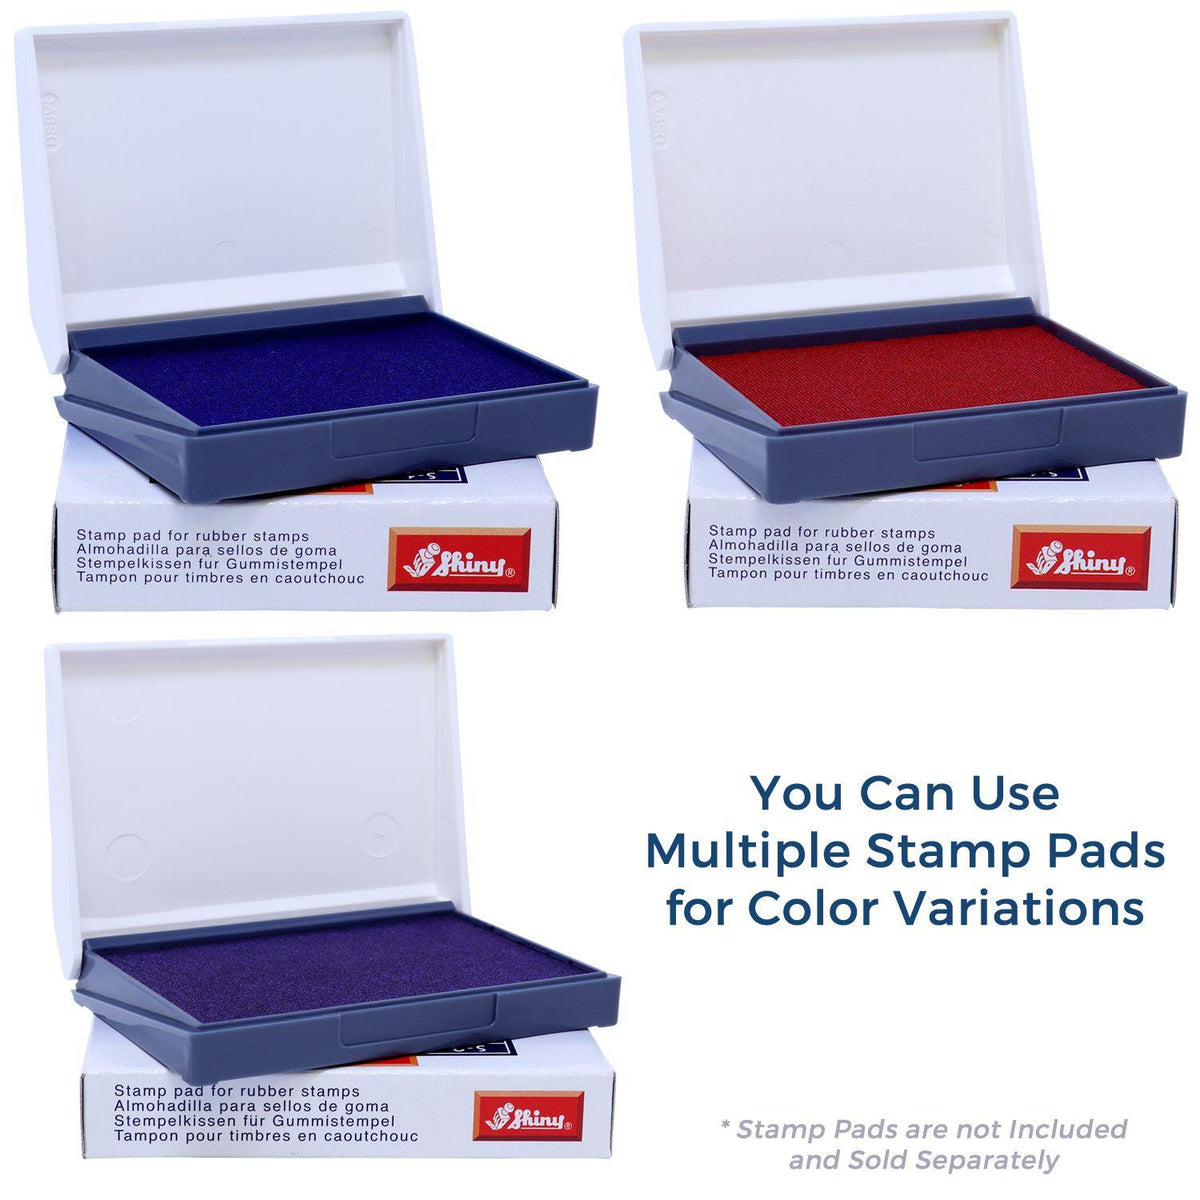 Stamp Pads for Fax It 1 Rubber Stamp Available